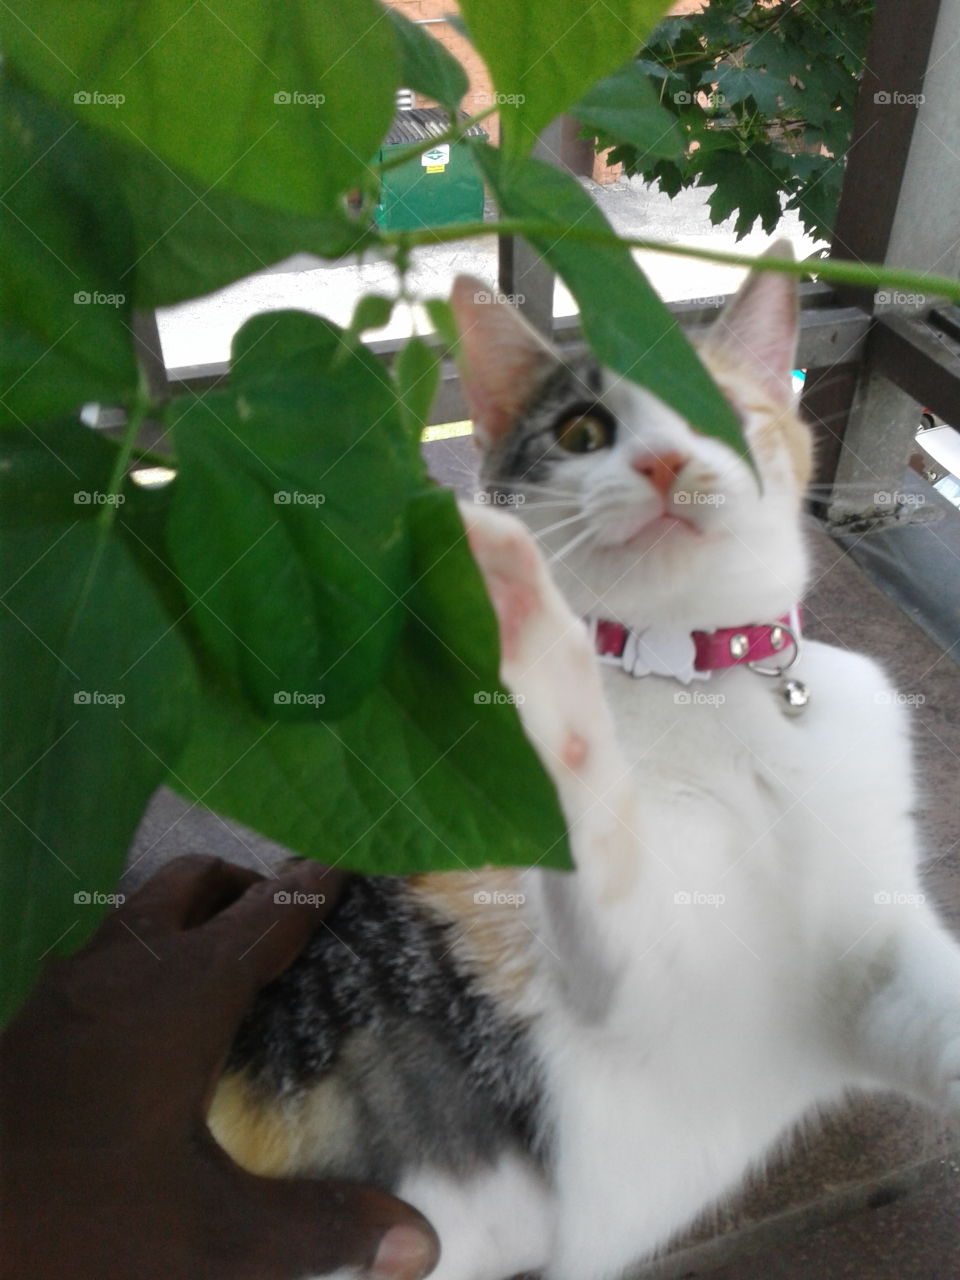 cookie checking the plants3